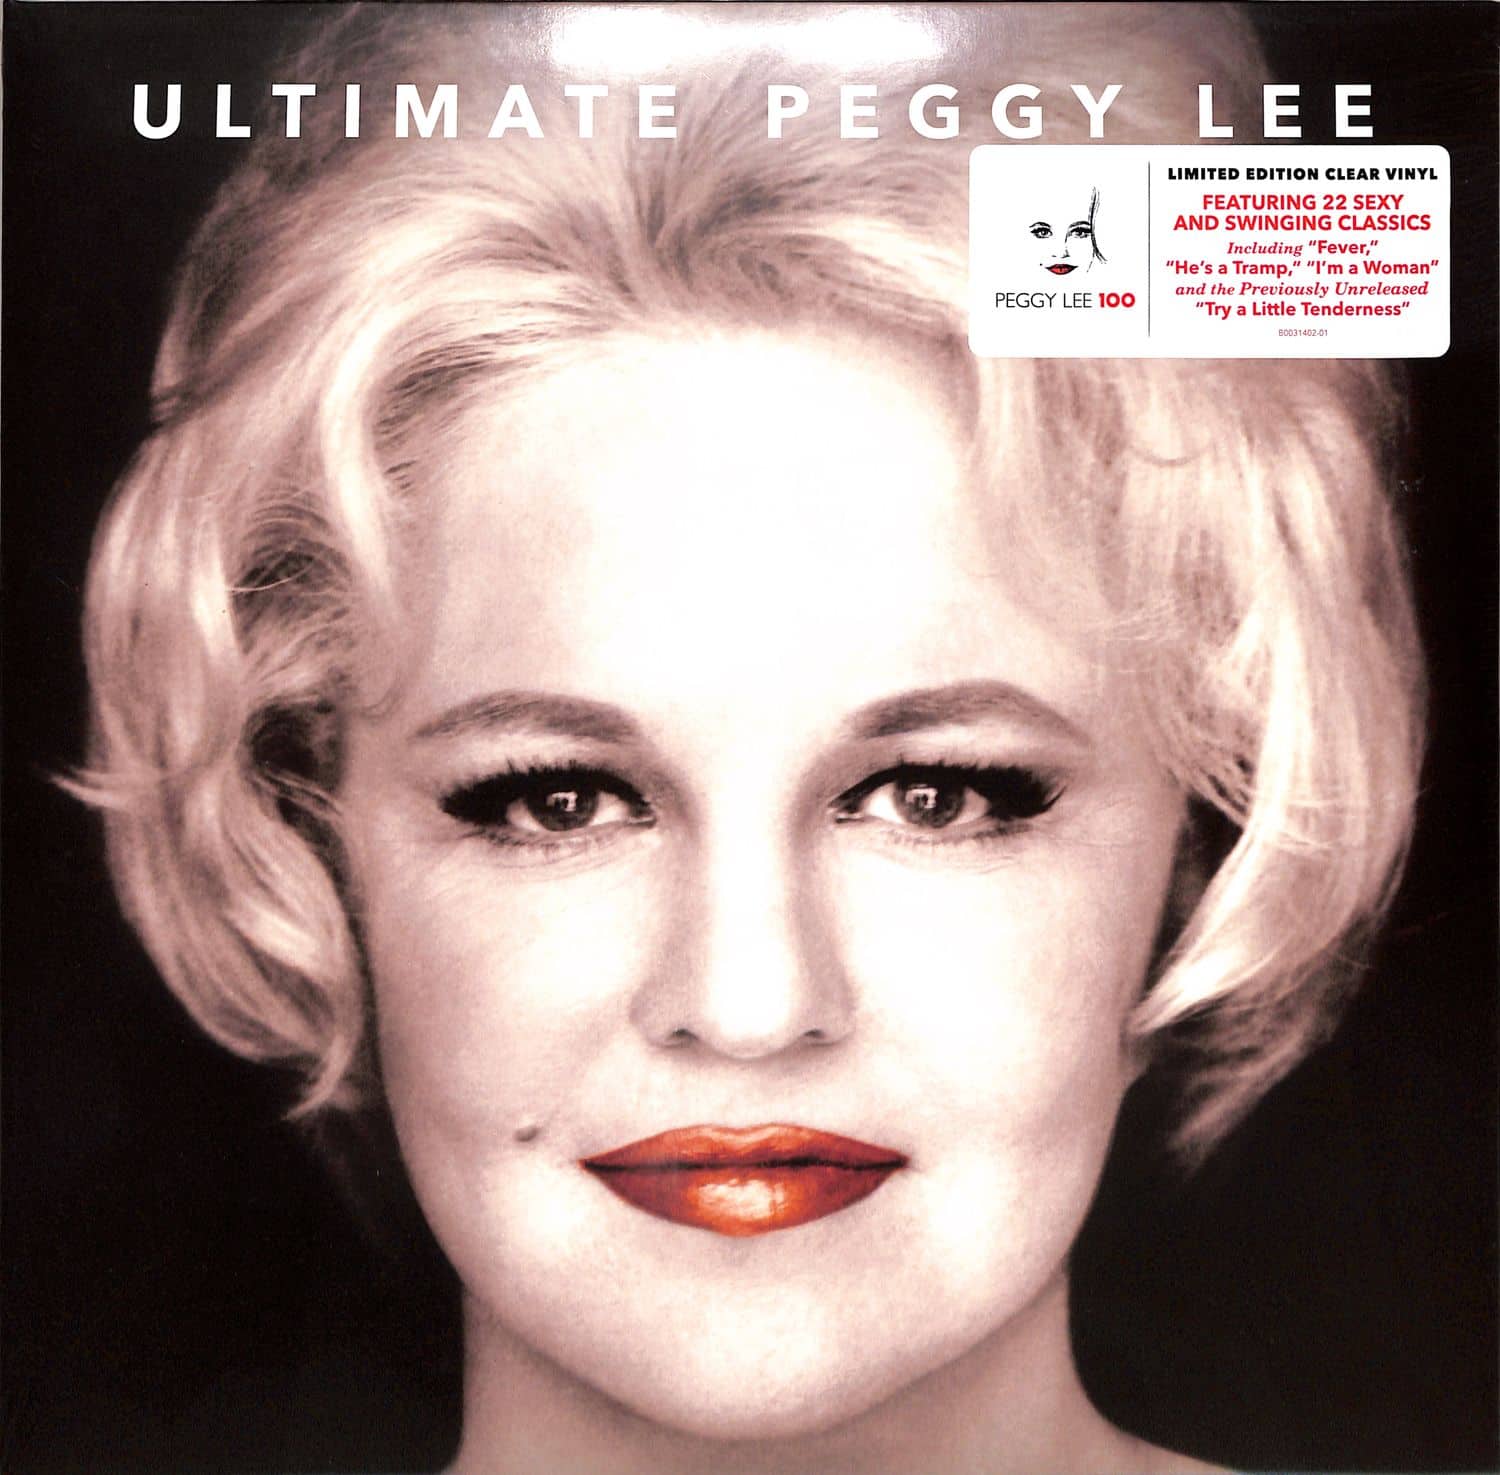 Peggy Lee - ULTIMATE PEGGY LEE 